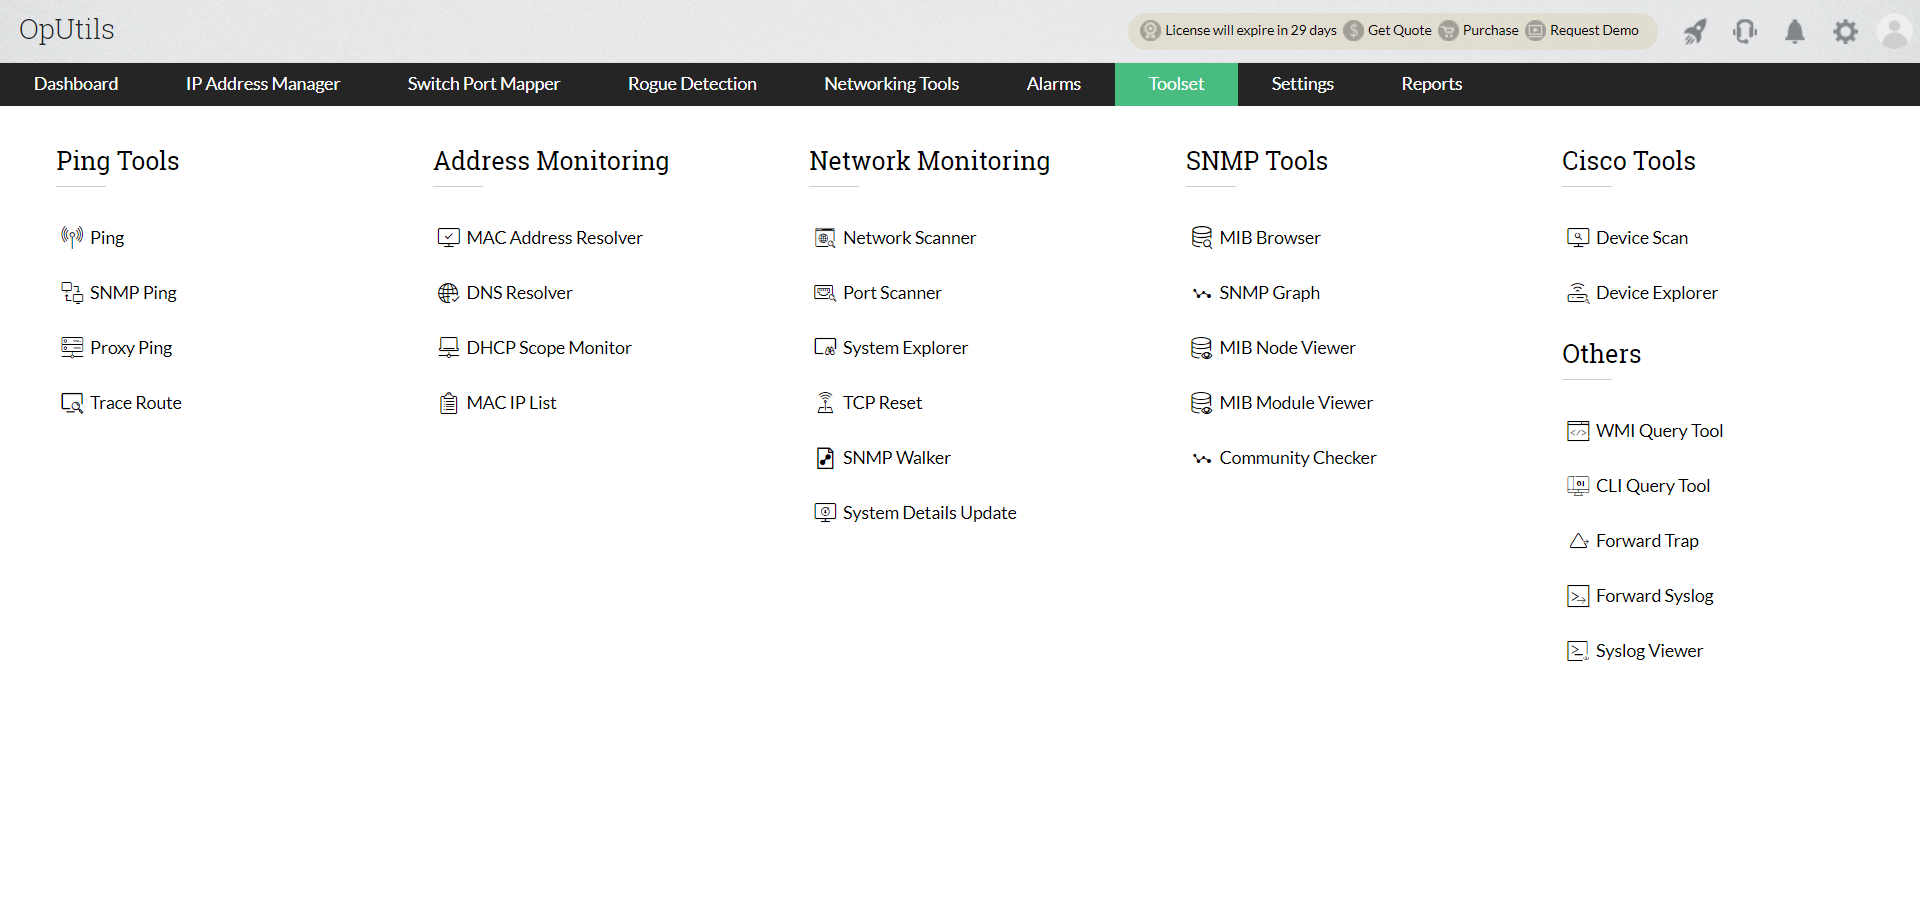 Managed Switch Port Mapping Tool - ManageEngine OpUtils